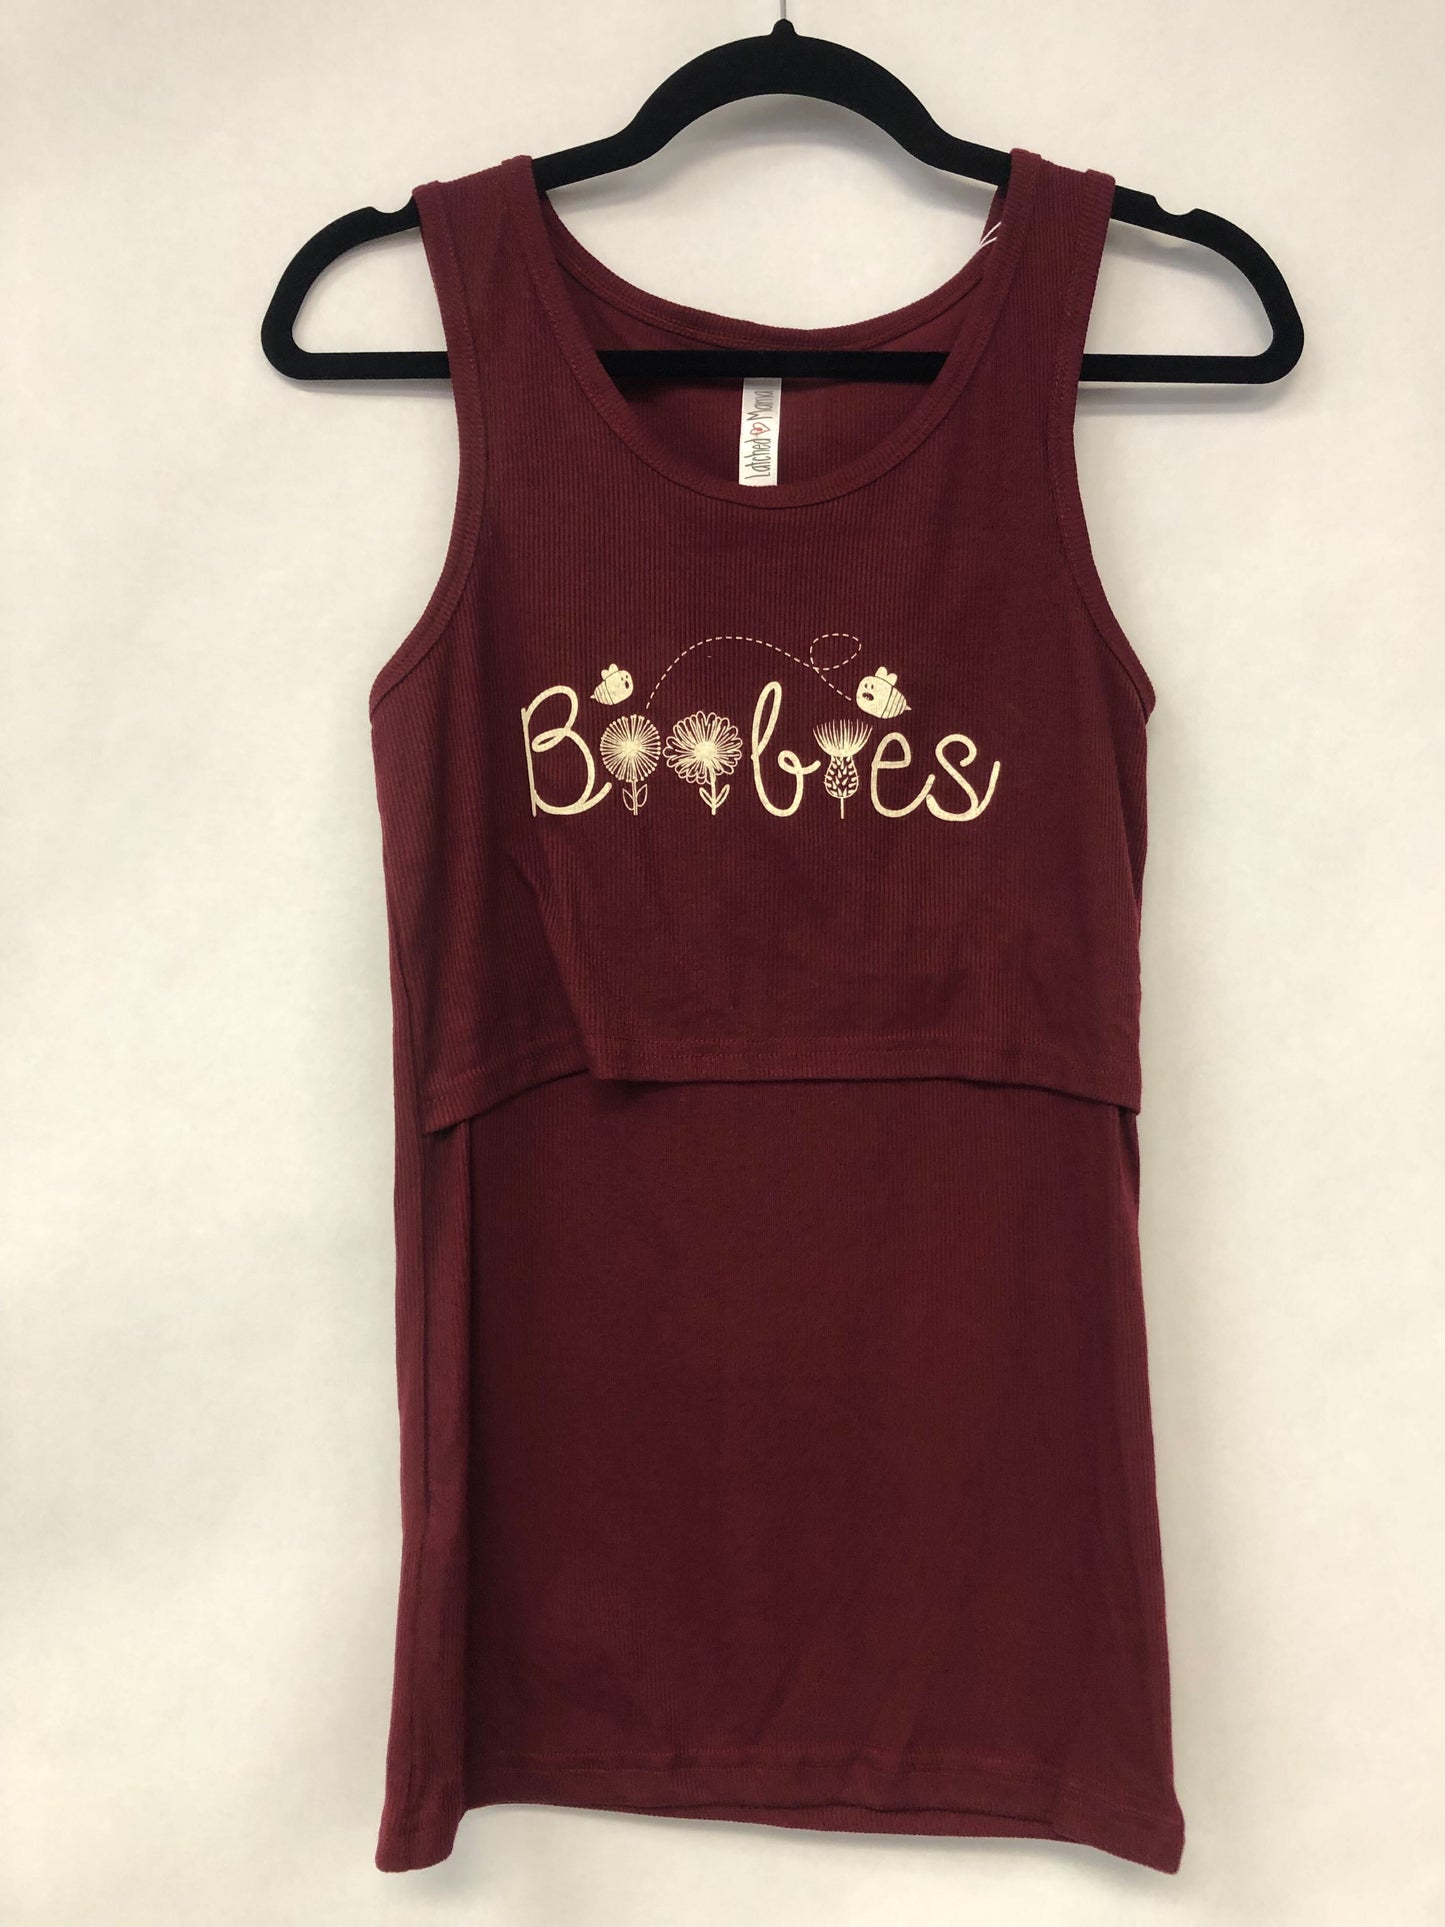 Outlet 6244 - Latched Mama Boo-Bees Nursing Tank - Wine - Extra Small